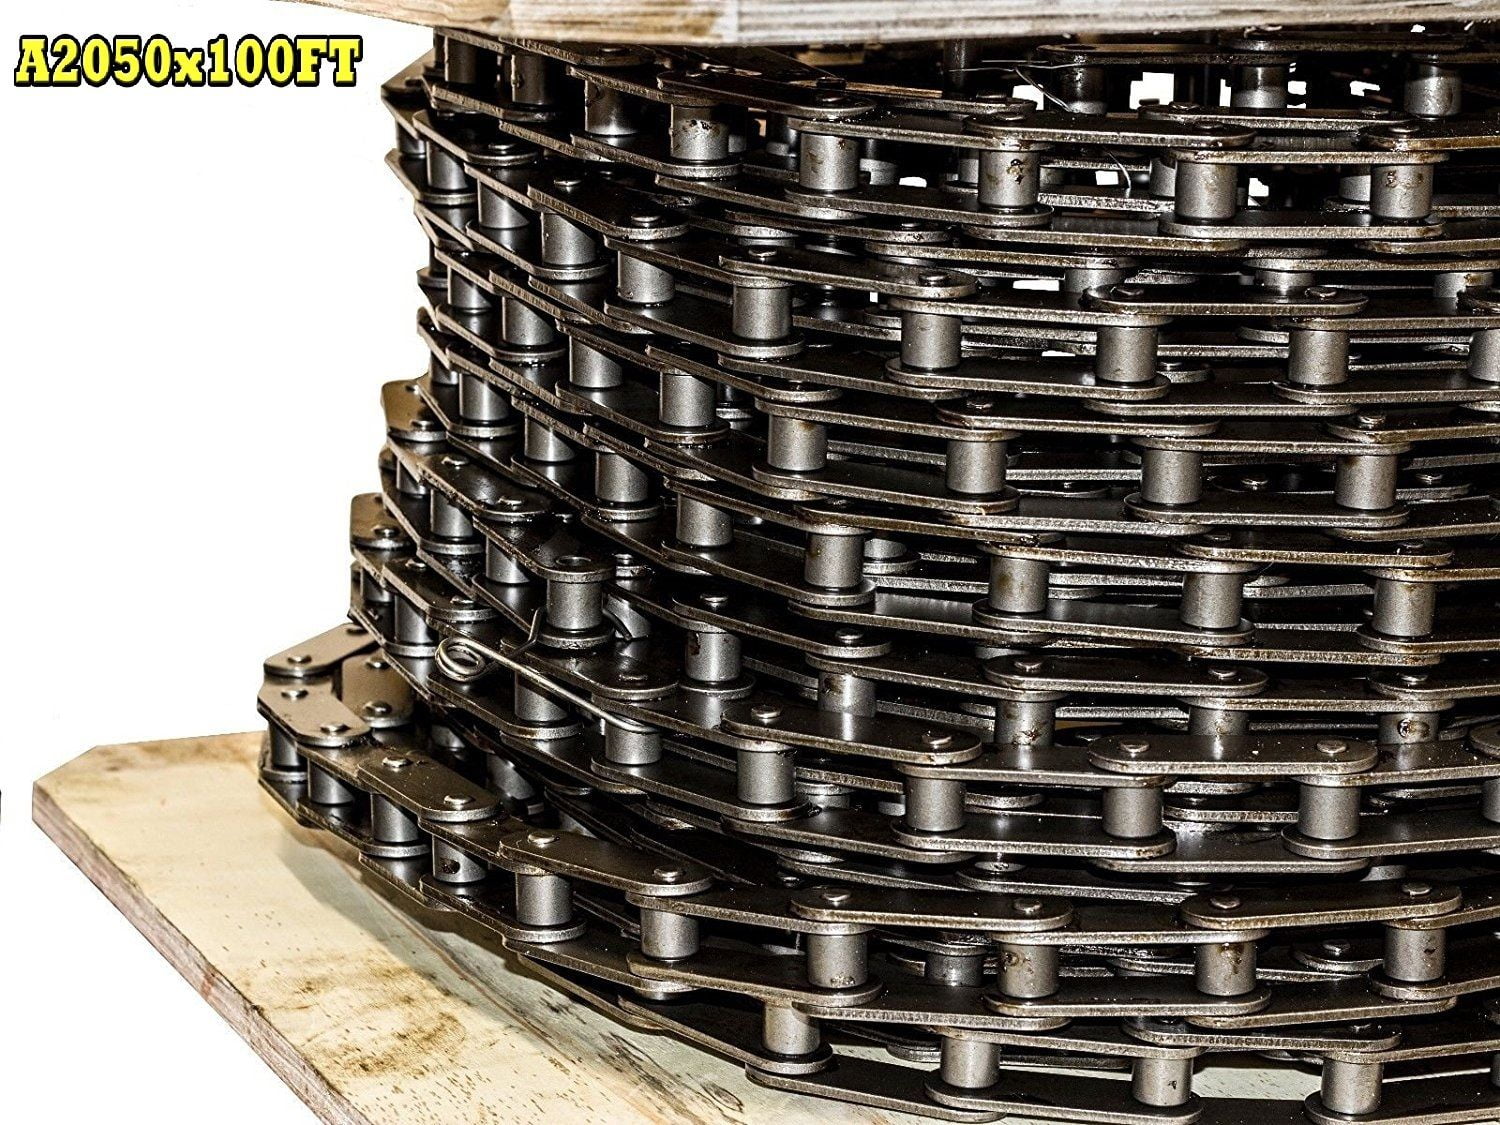 Jeremywell BL466 Leaf Chain 10 Feet for Forklift Masts,Hoisting with 1 Connecting Link 